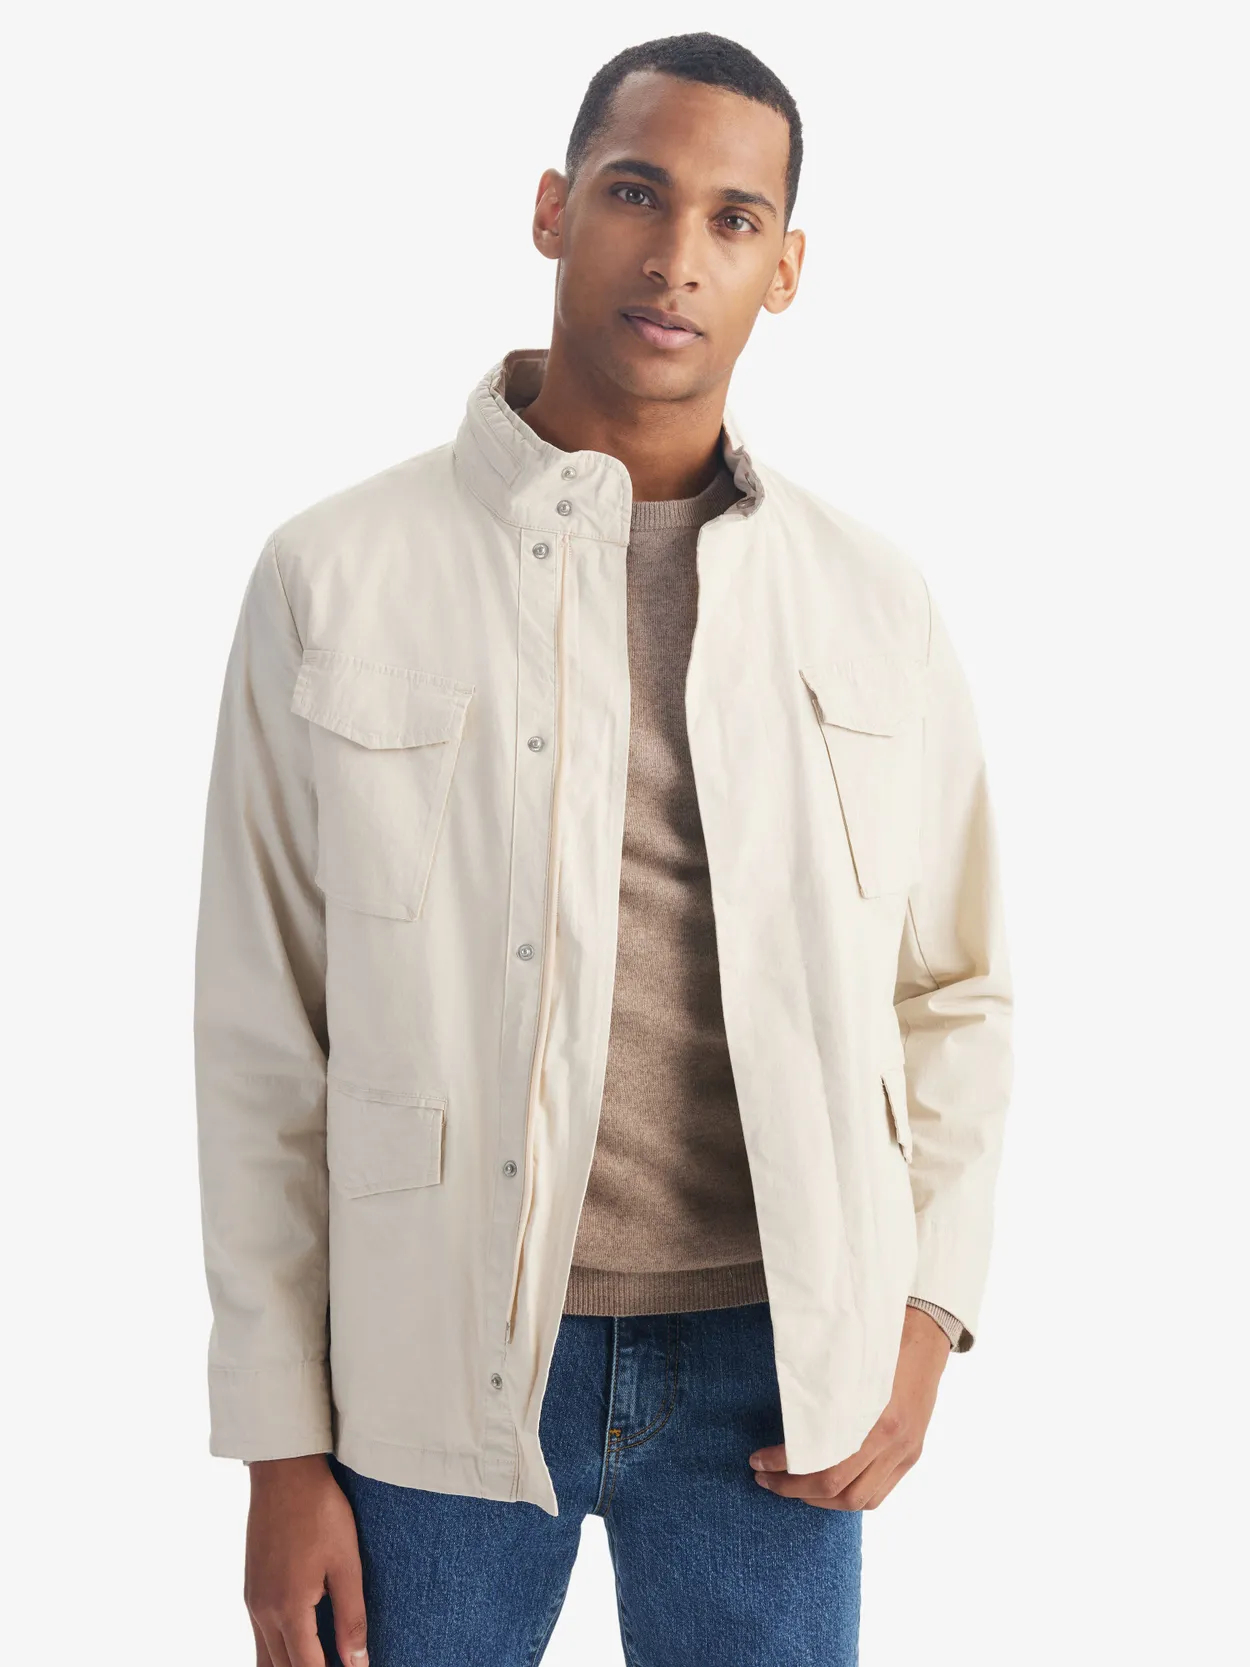 Men's light jacket are essential wardrobe pieces that combine style, functionality, and comfort in one versatile garment.